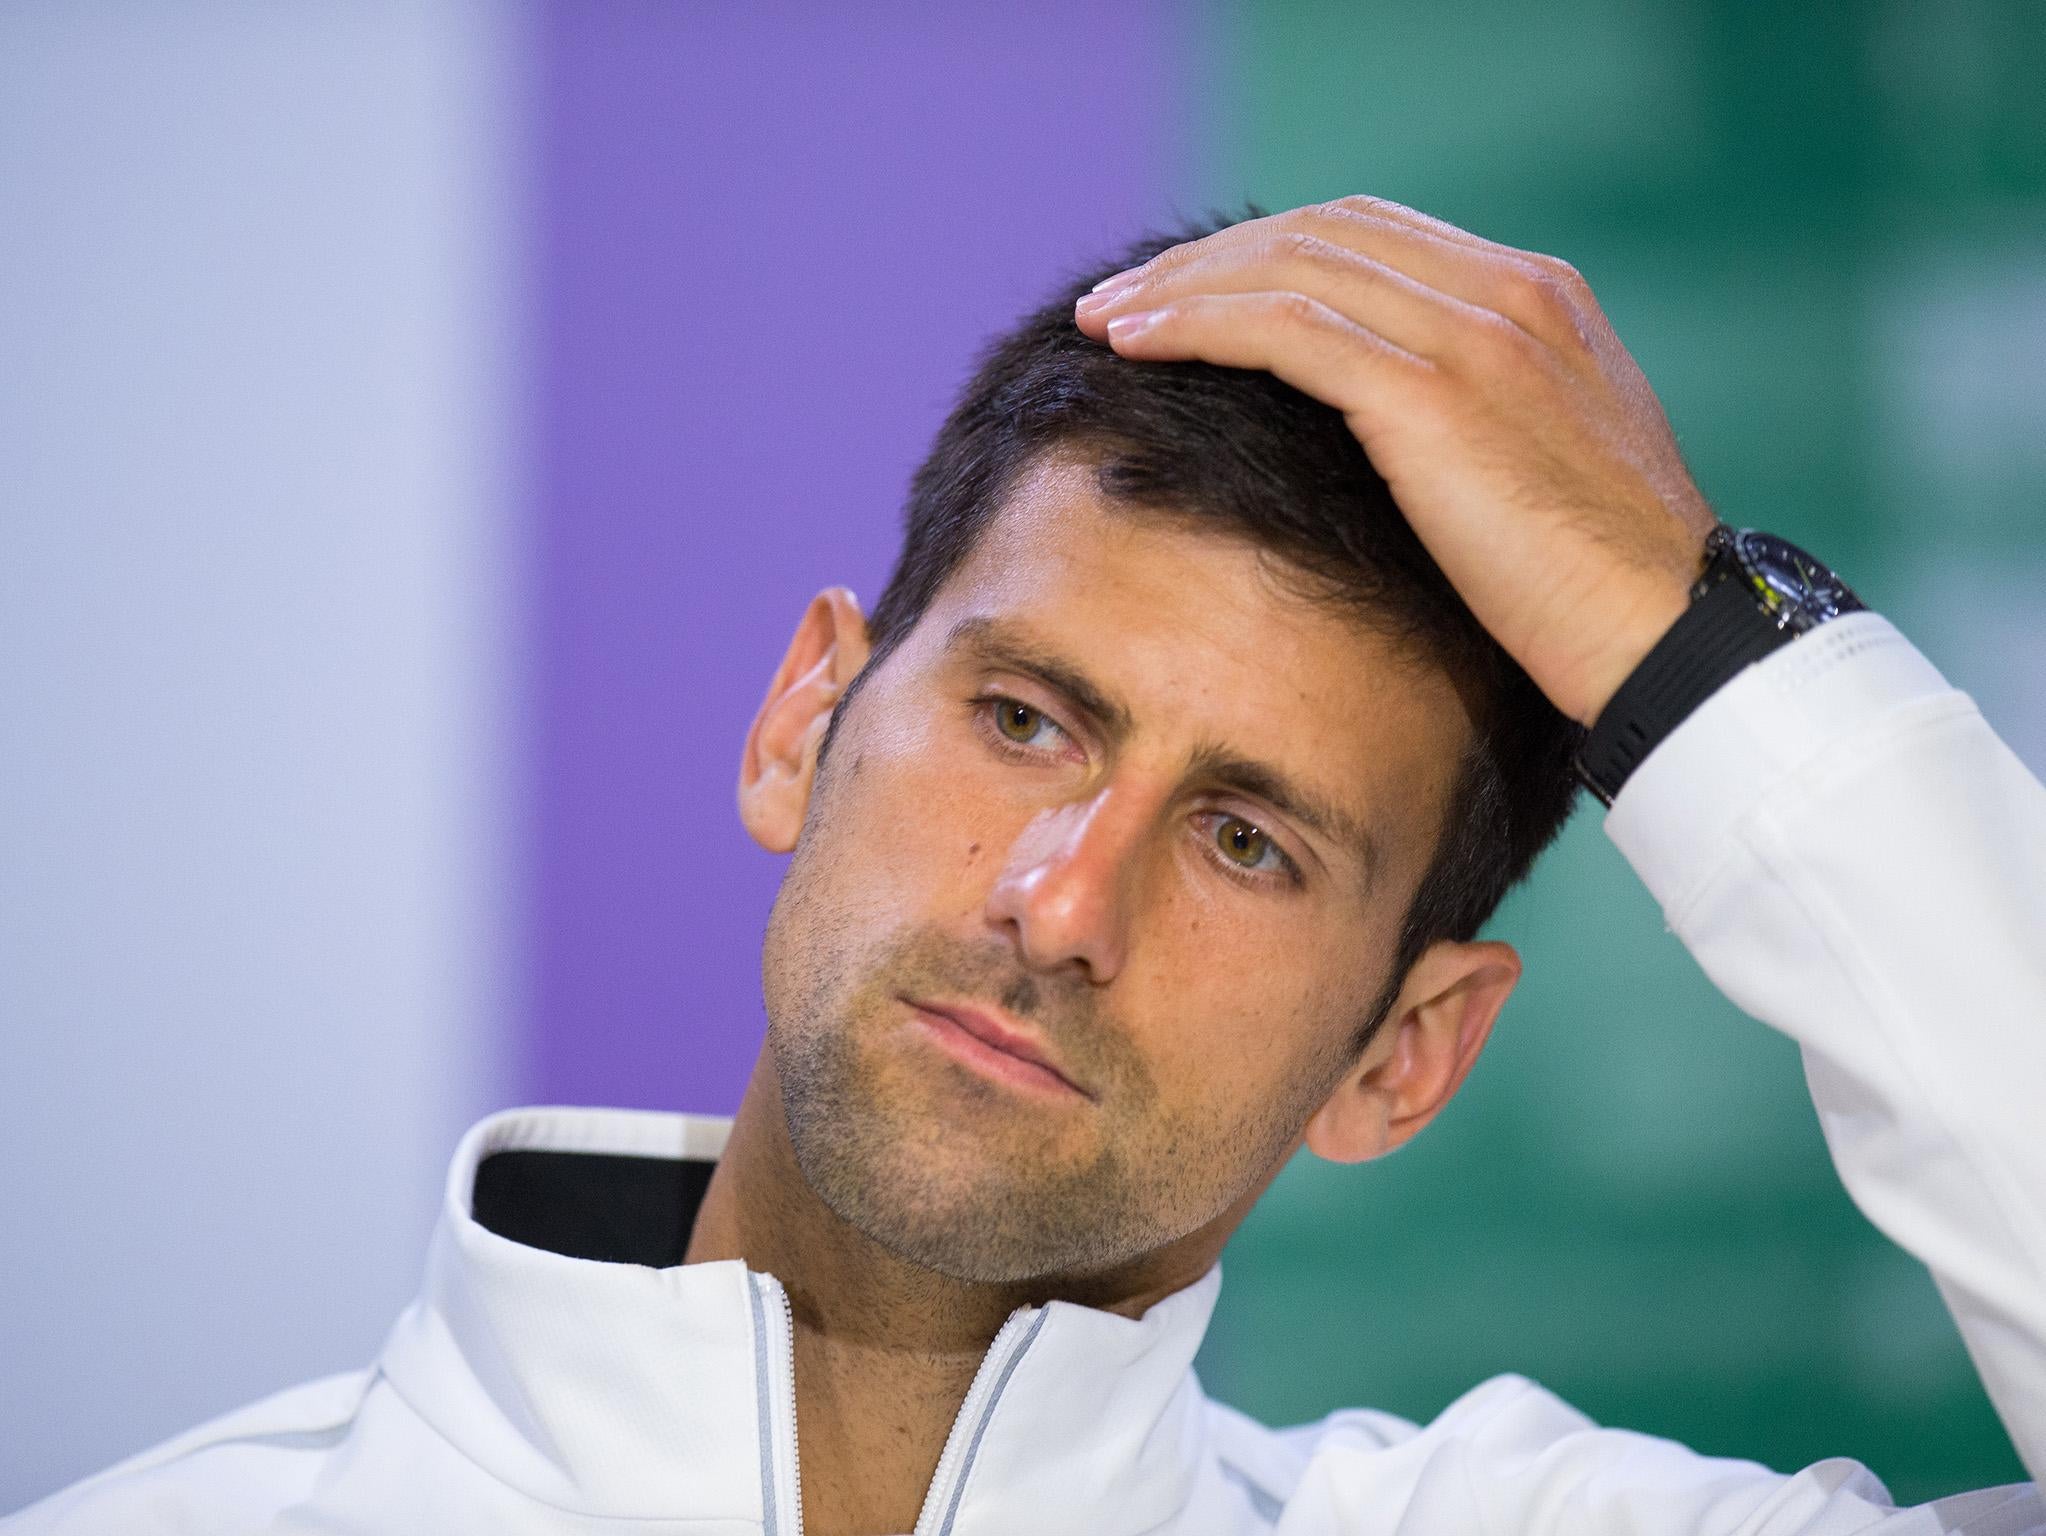 Djokovic has pulled out of two tournaments in a day